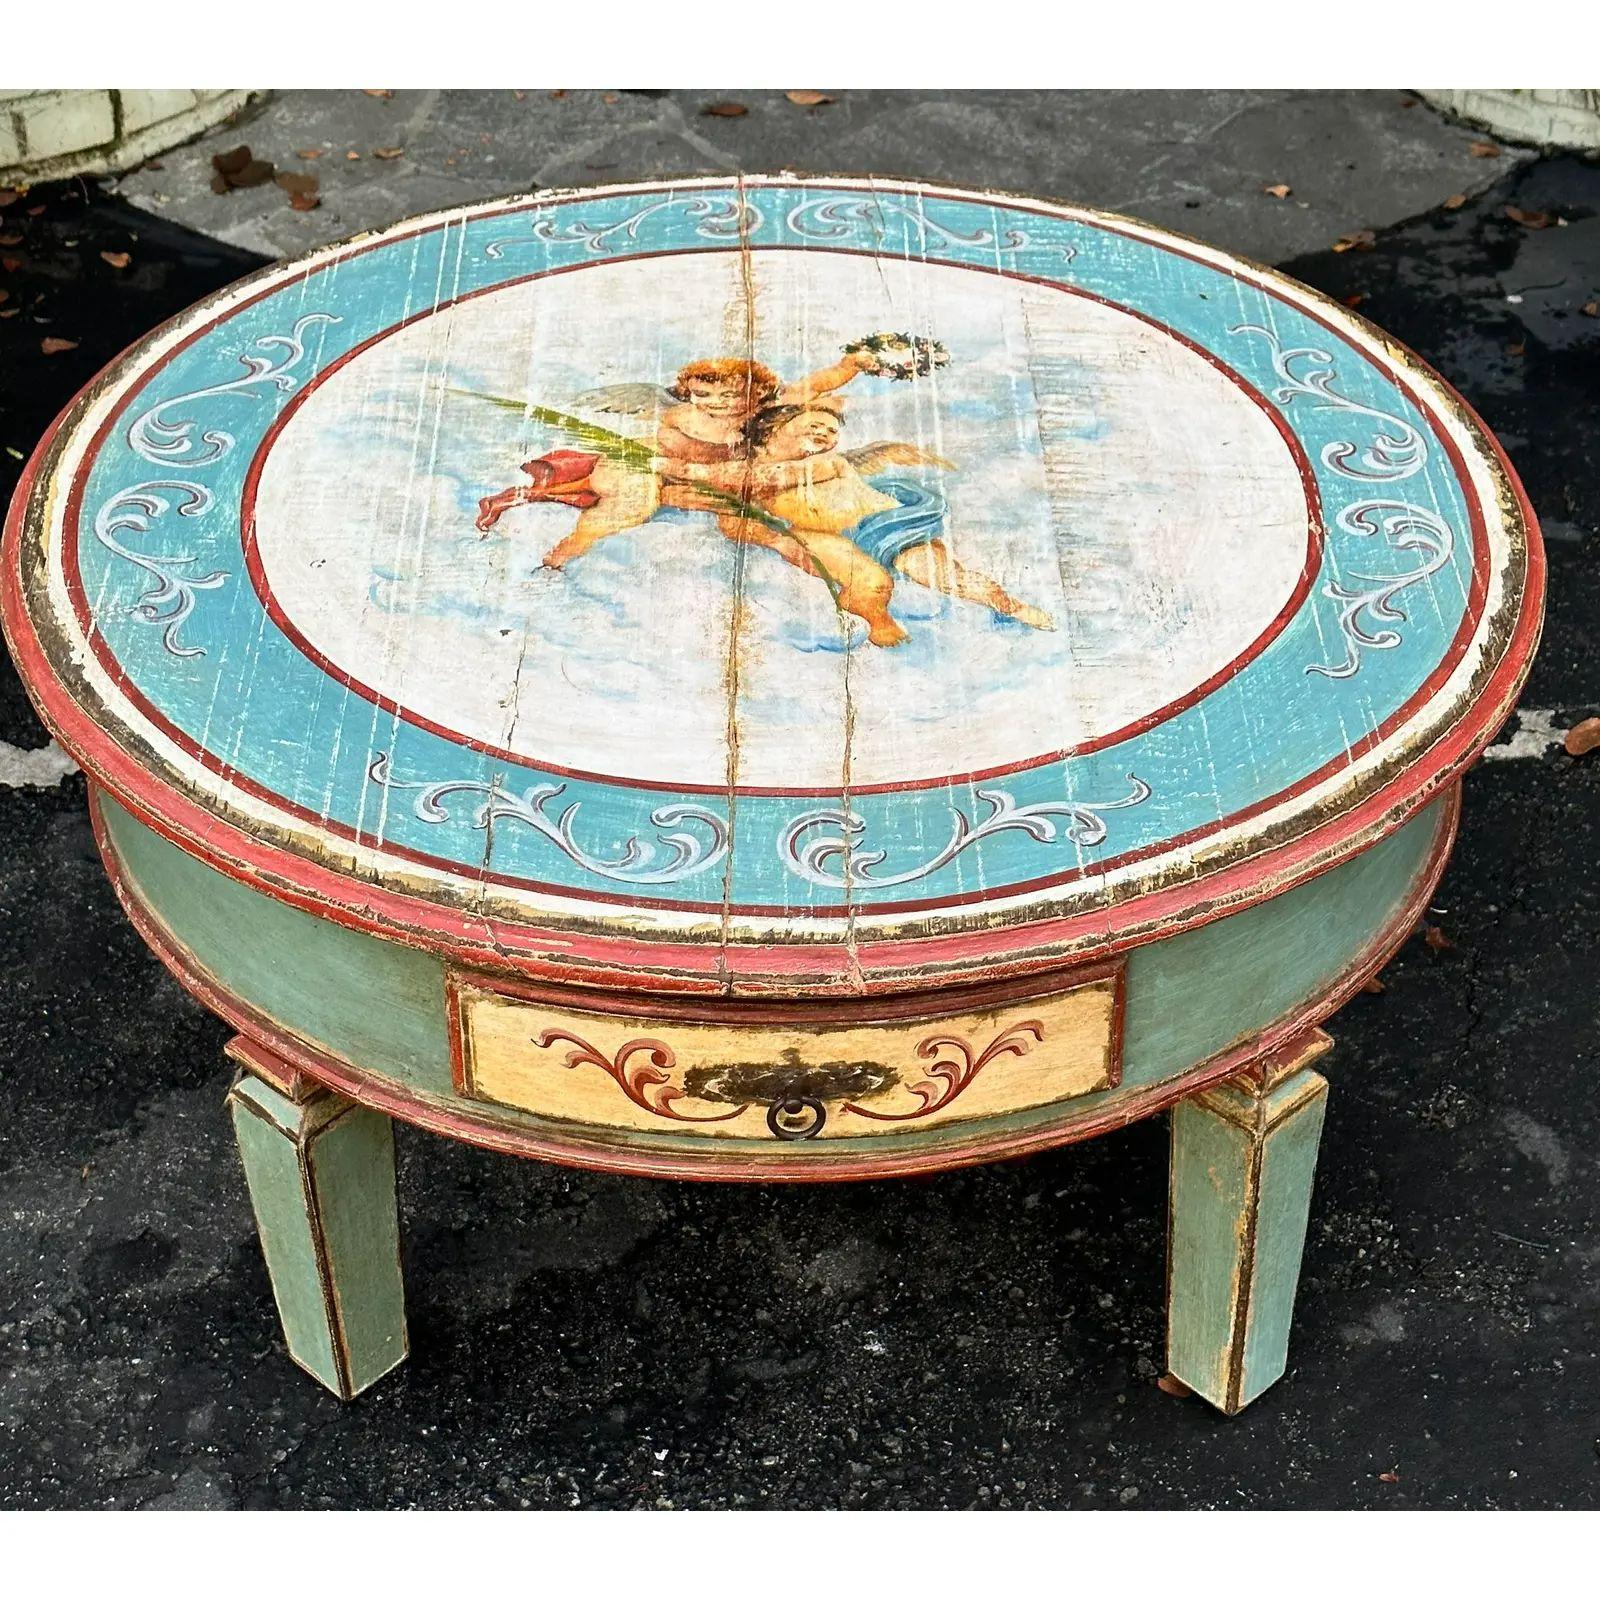 Rustic 18th C Style Round Hand Painted Angel Coffee Table by Equator Furniture